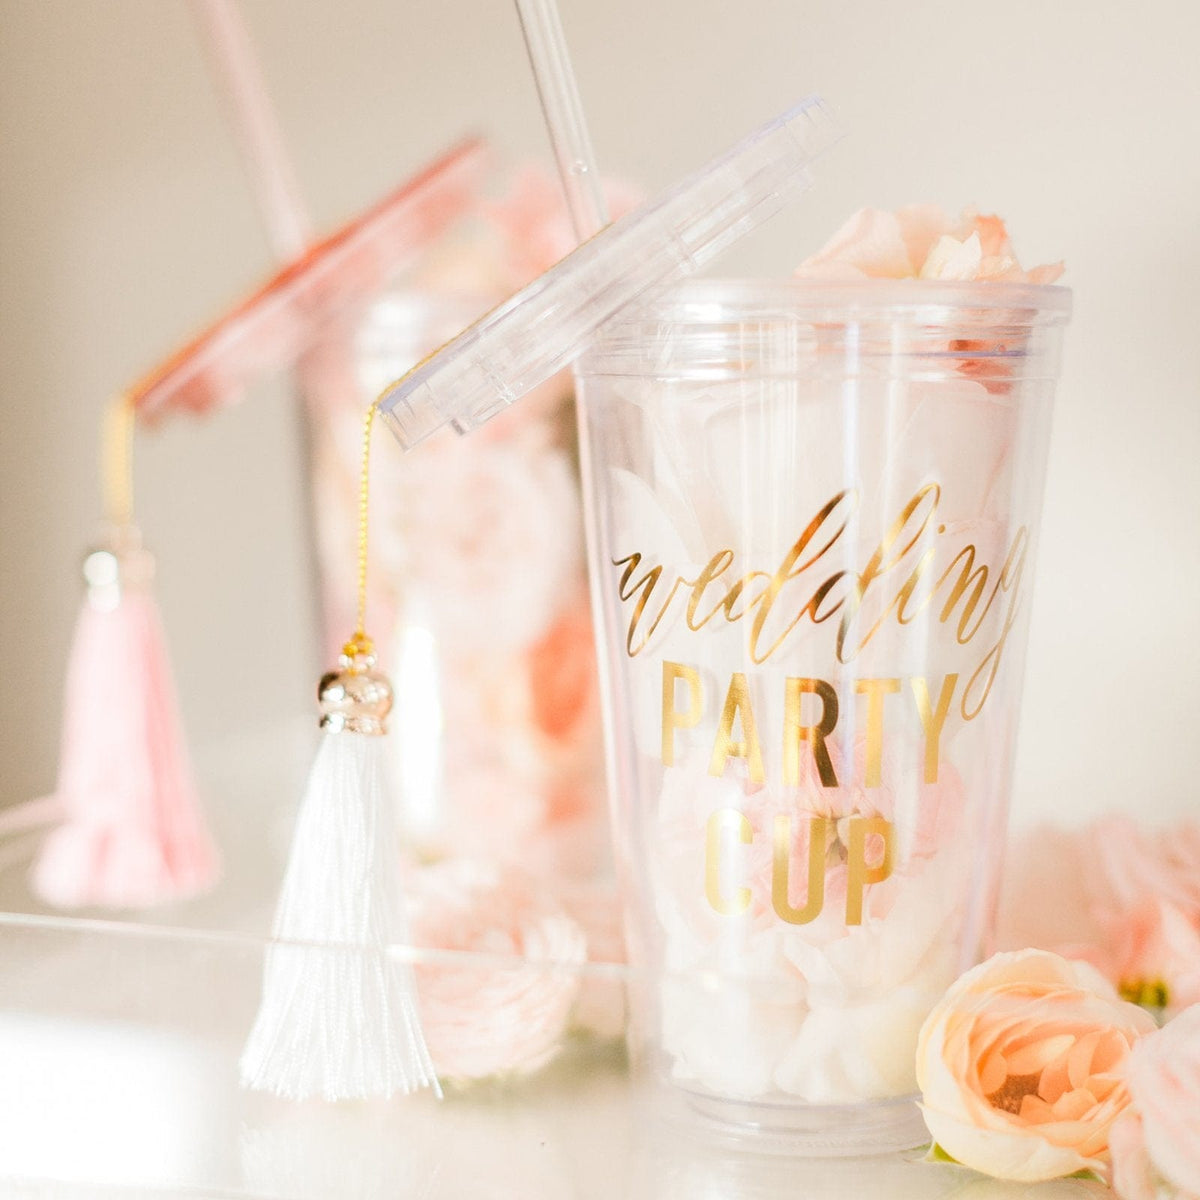 &#39;Party Cup&#39; Tumbler with Straw Gartner Studios Drinking Glass 42331